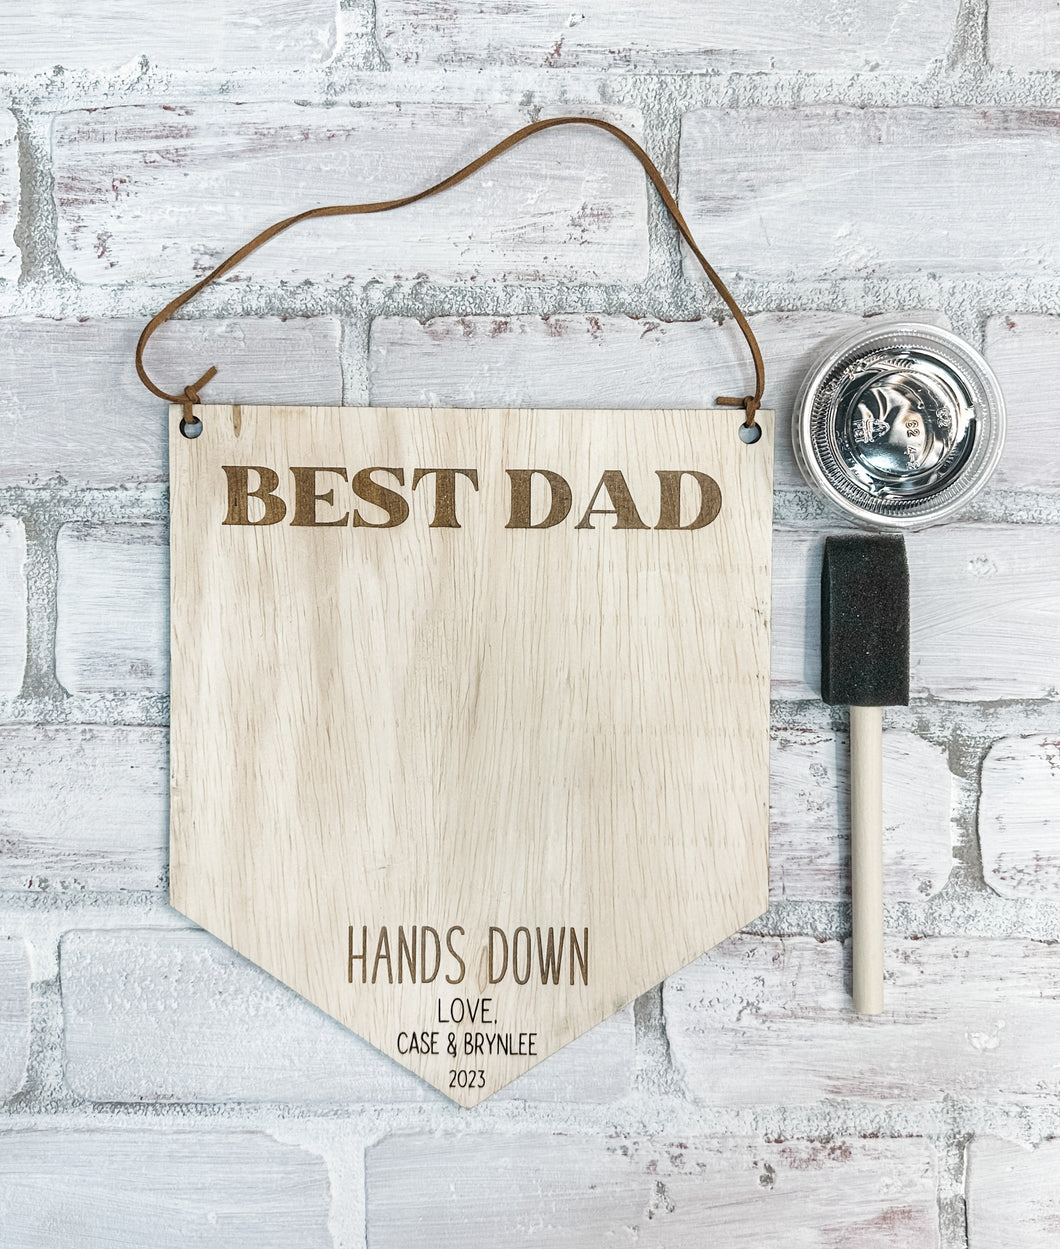 Best Dad Hands Down Handprint Kit - Father’s Day Gift